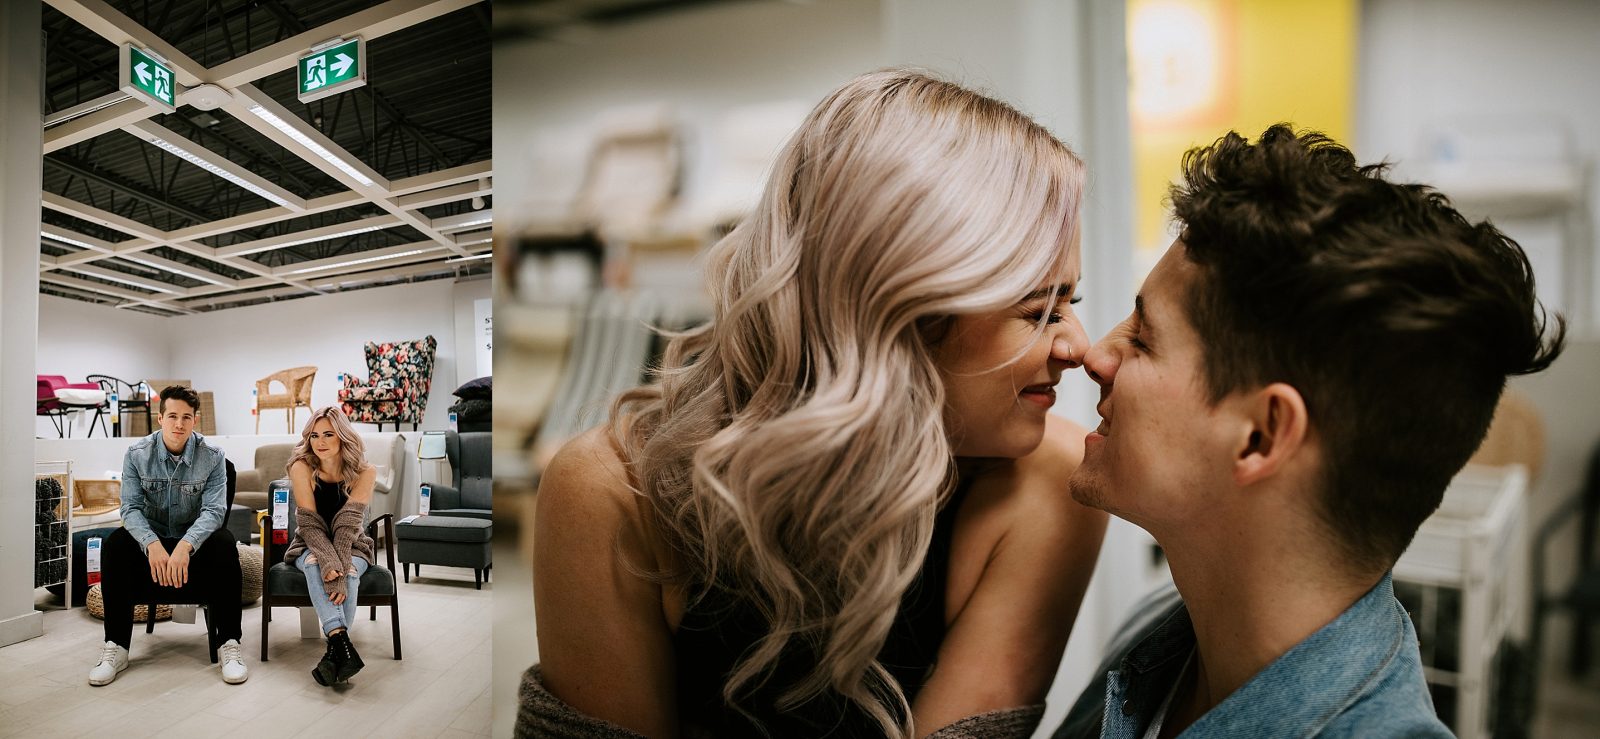 Hipster engagement session inside IKEA Canada